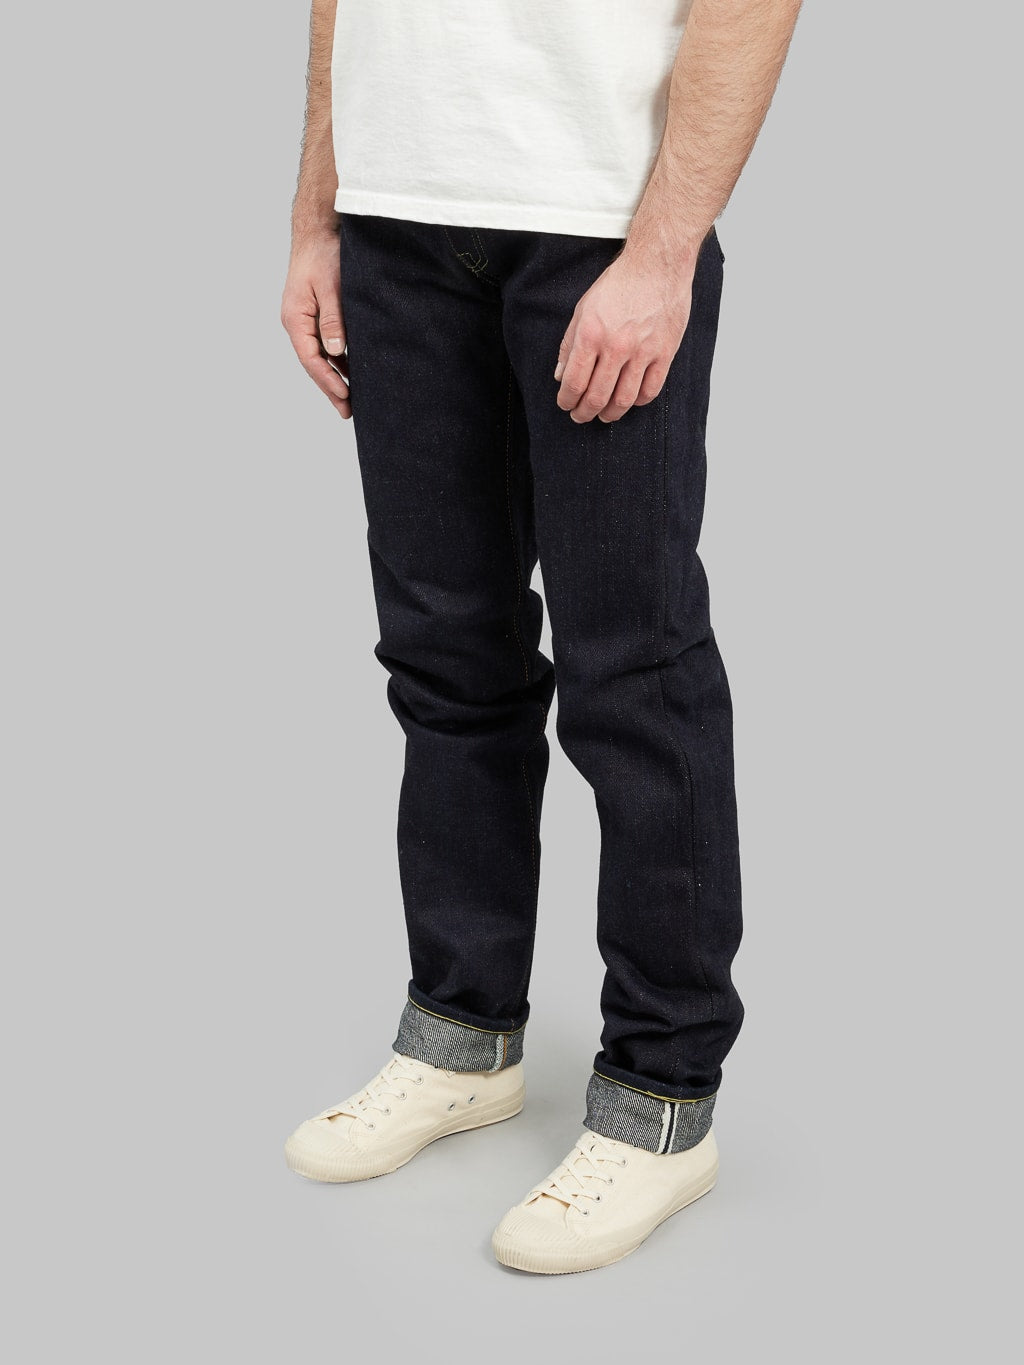 The Strike Gold Extra Heavyweight straight tapered jeans side fit